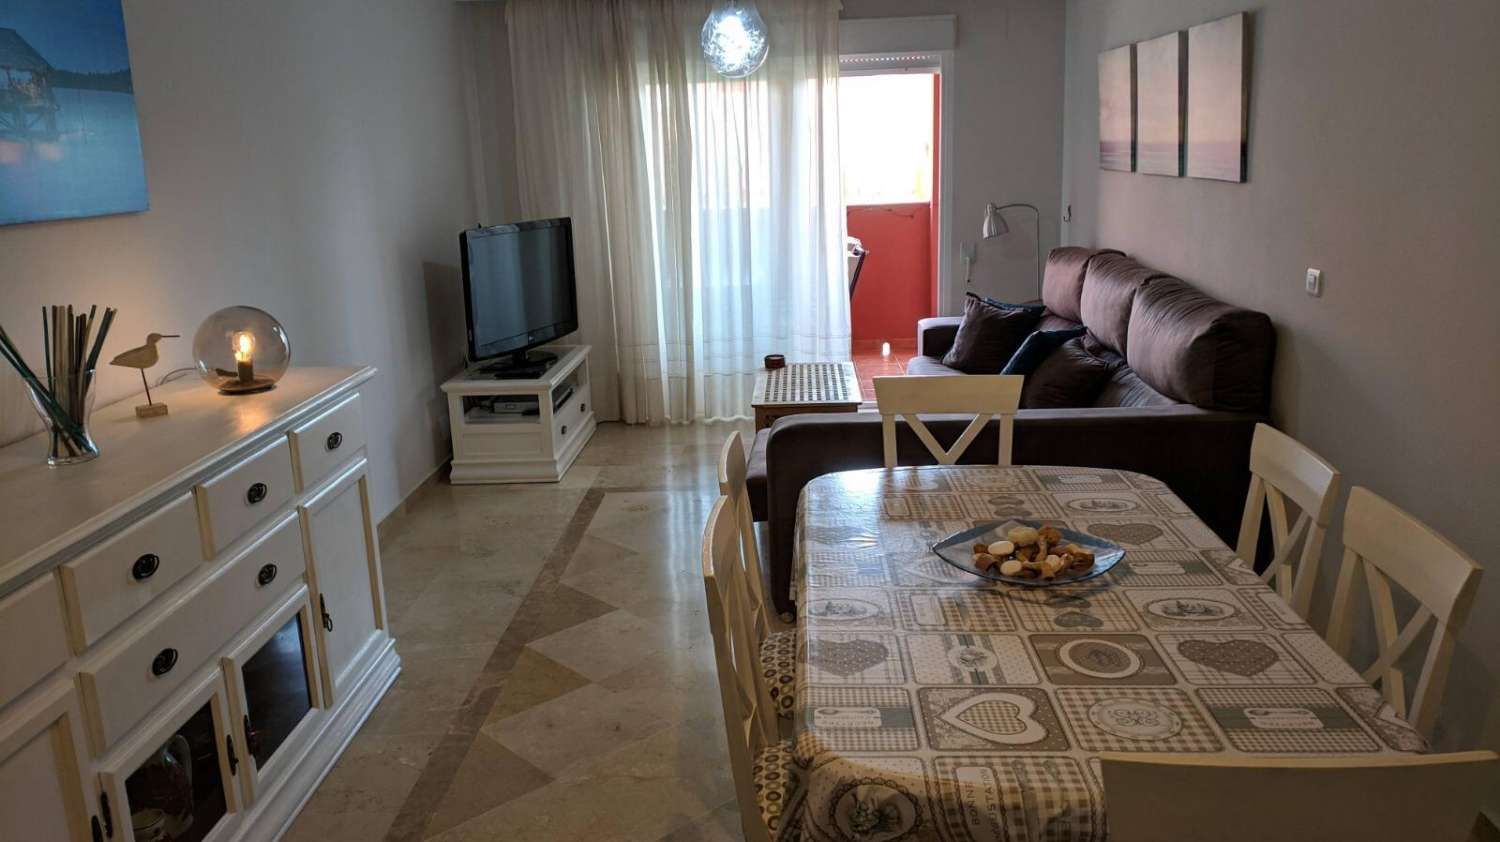 FOR RENT SHORT SEASON BEAUTIFUL APARTMENT WITH SEA VIEWS